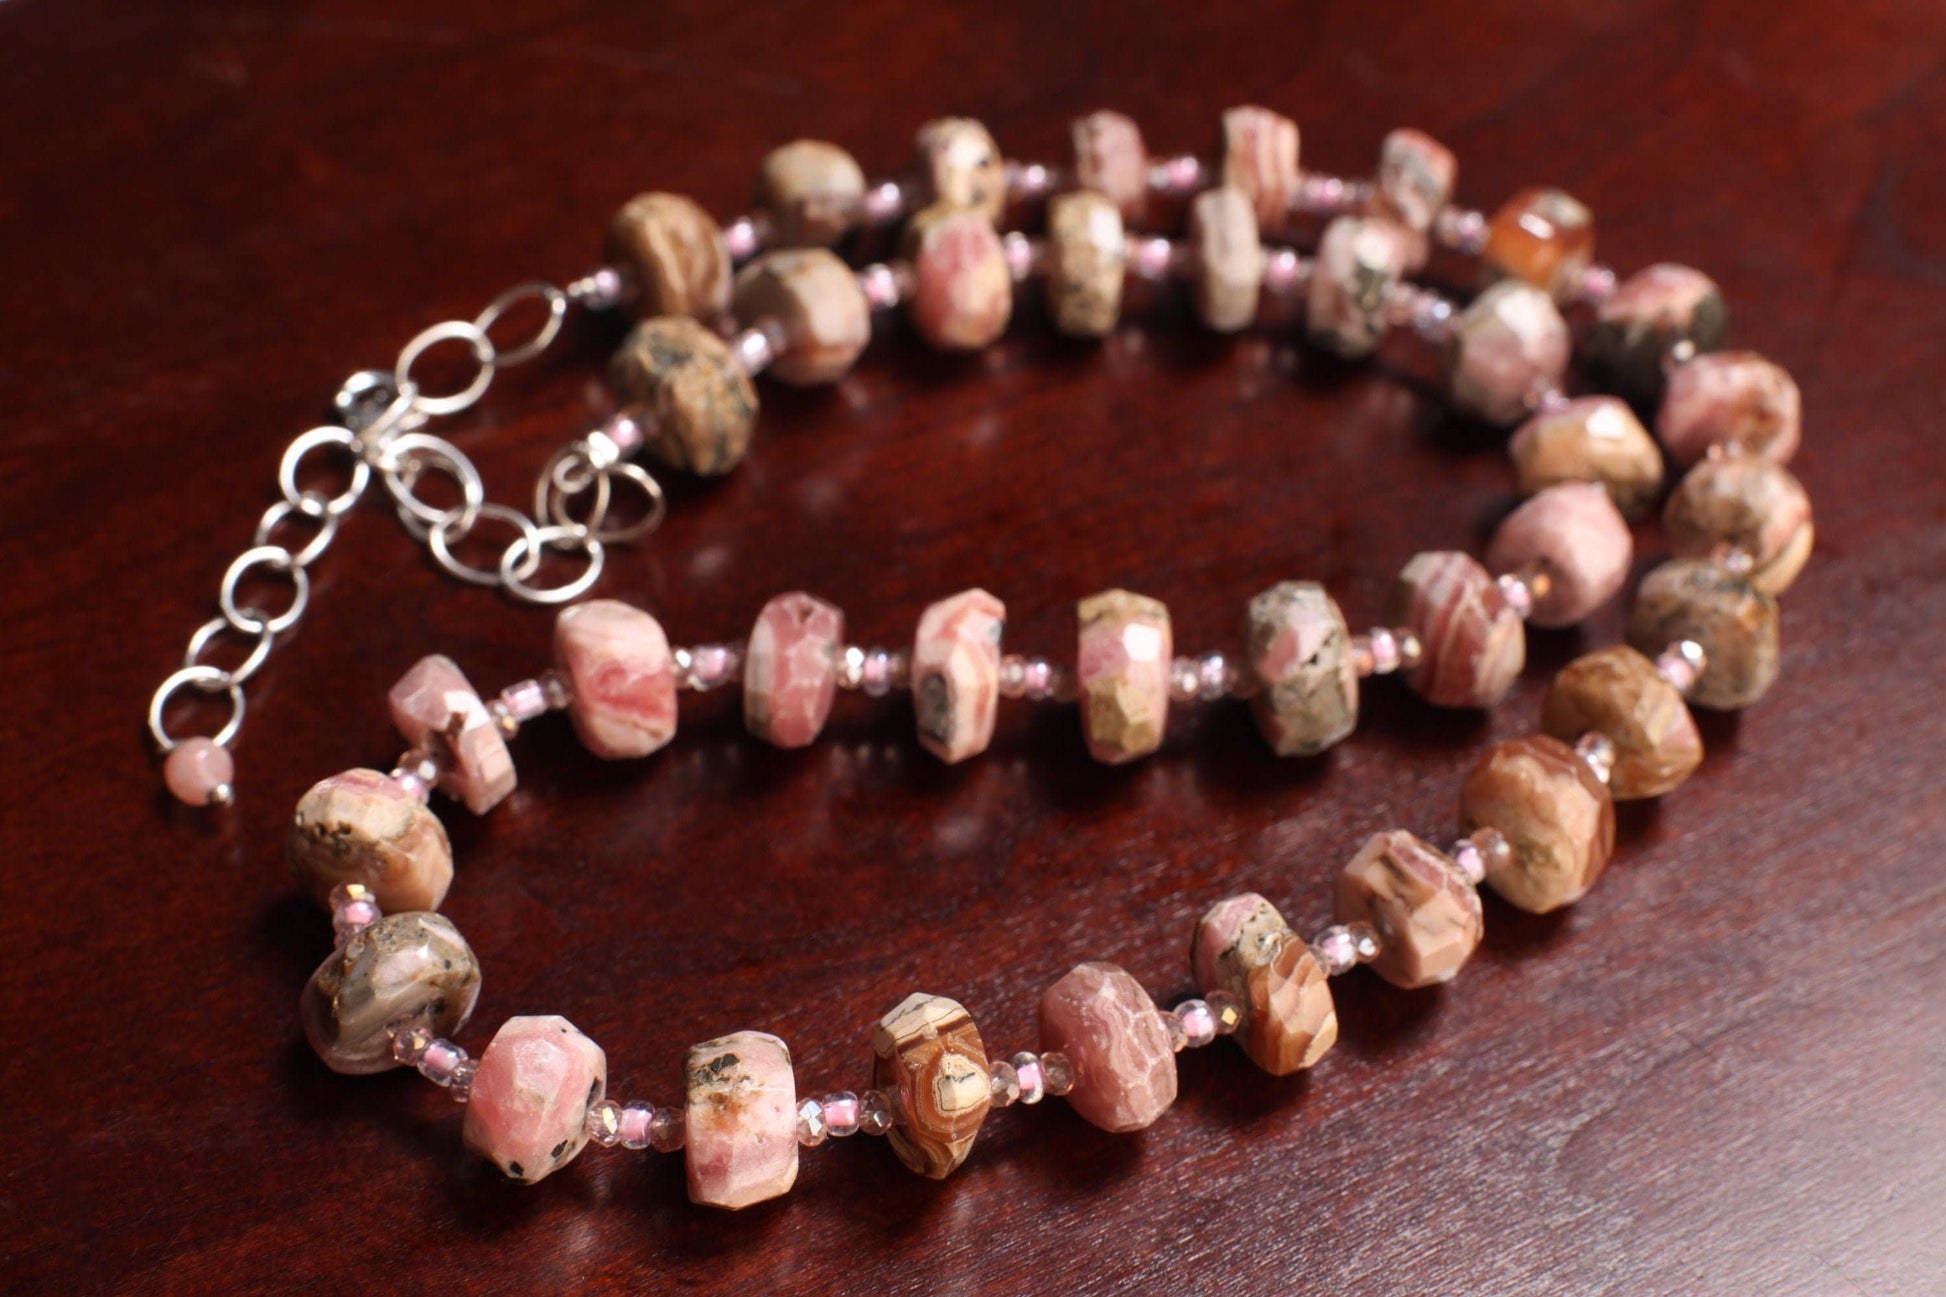 Argentina Rhodochrosite Faceted Rondelle 6x11mm Necklace, Pink Quartz Spacers, 925 Sterling Silver 20.5&quot; Necklace with 2&quot; Extension